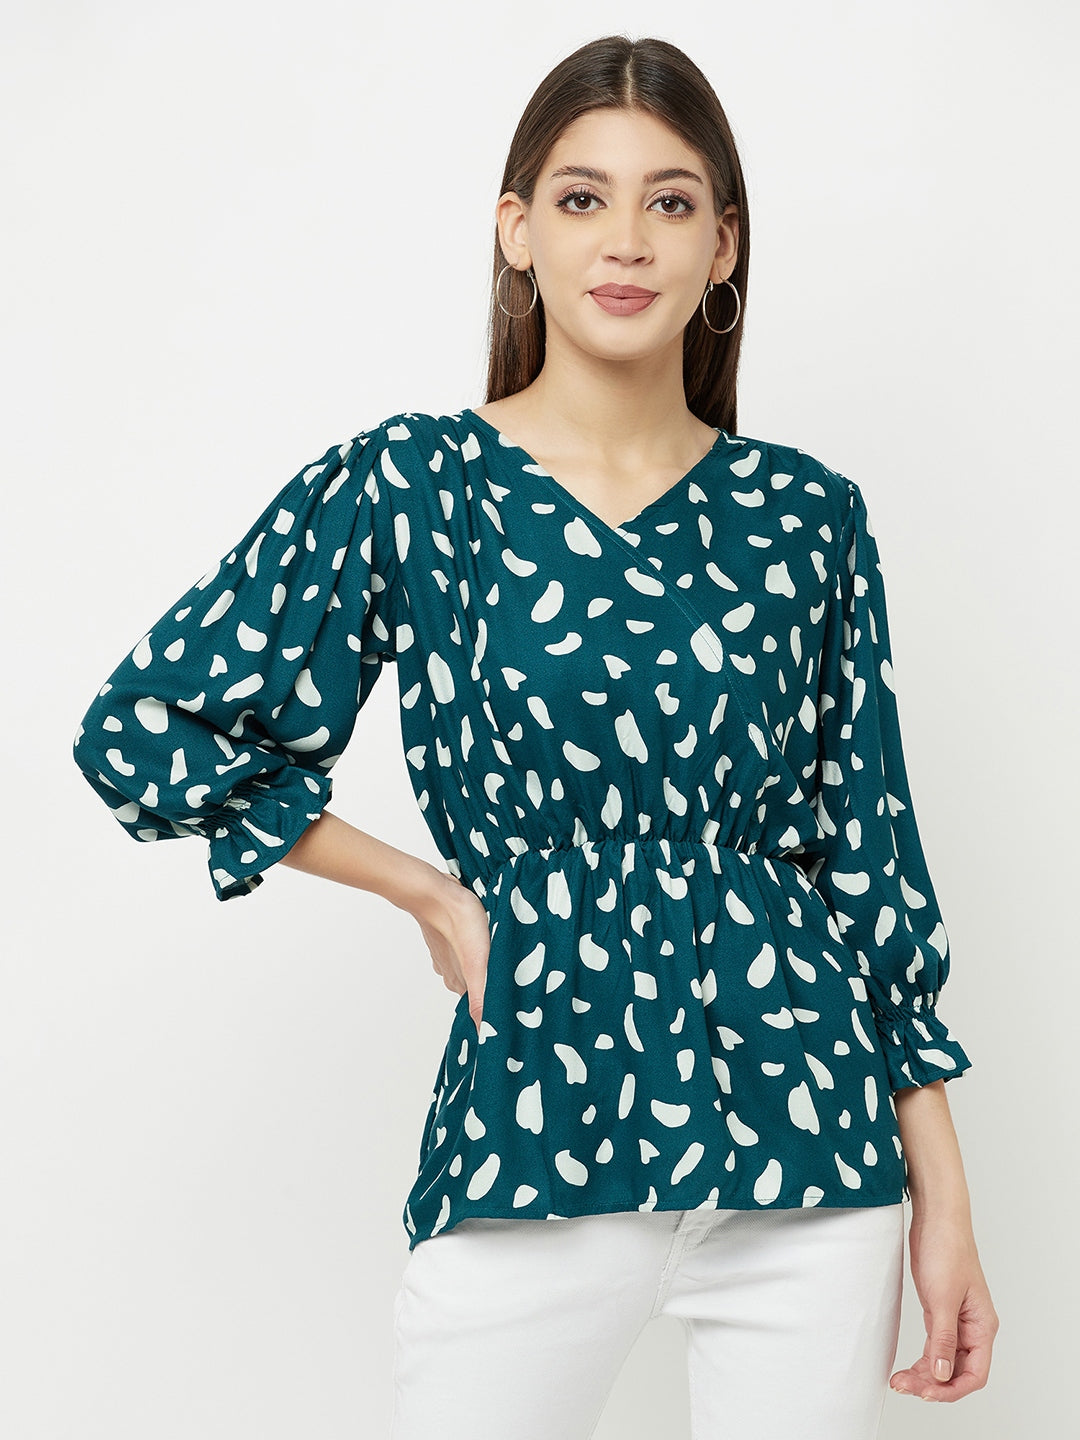 Teal Green Printed V-Neck Empire Top - Women Tops